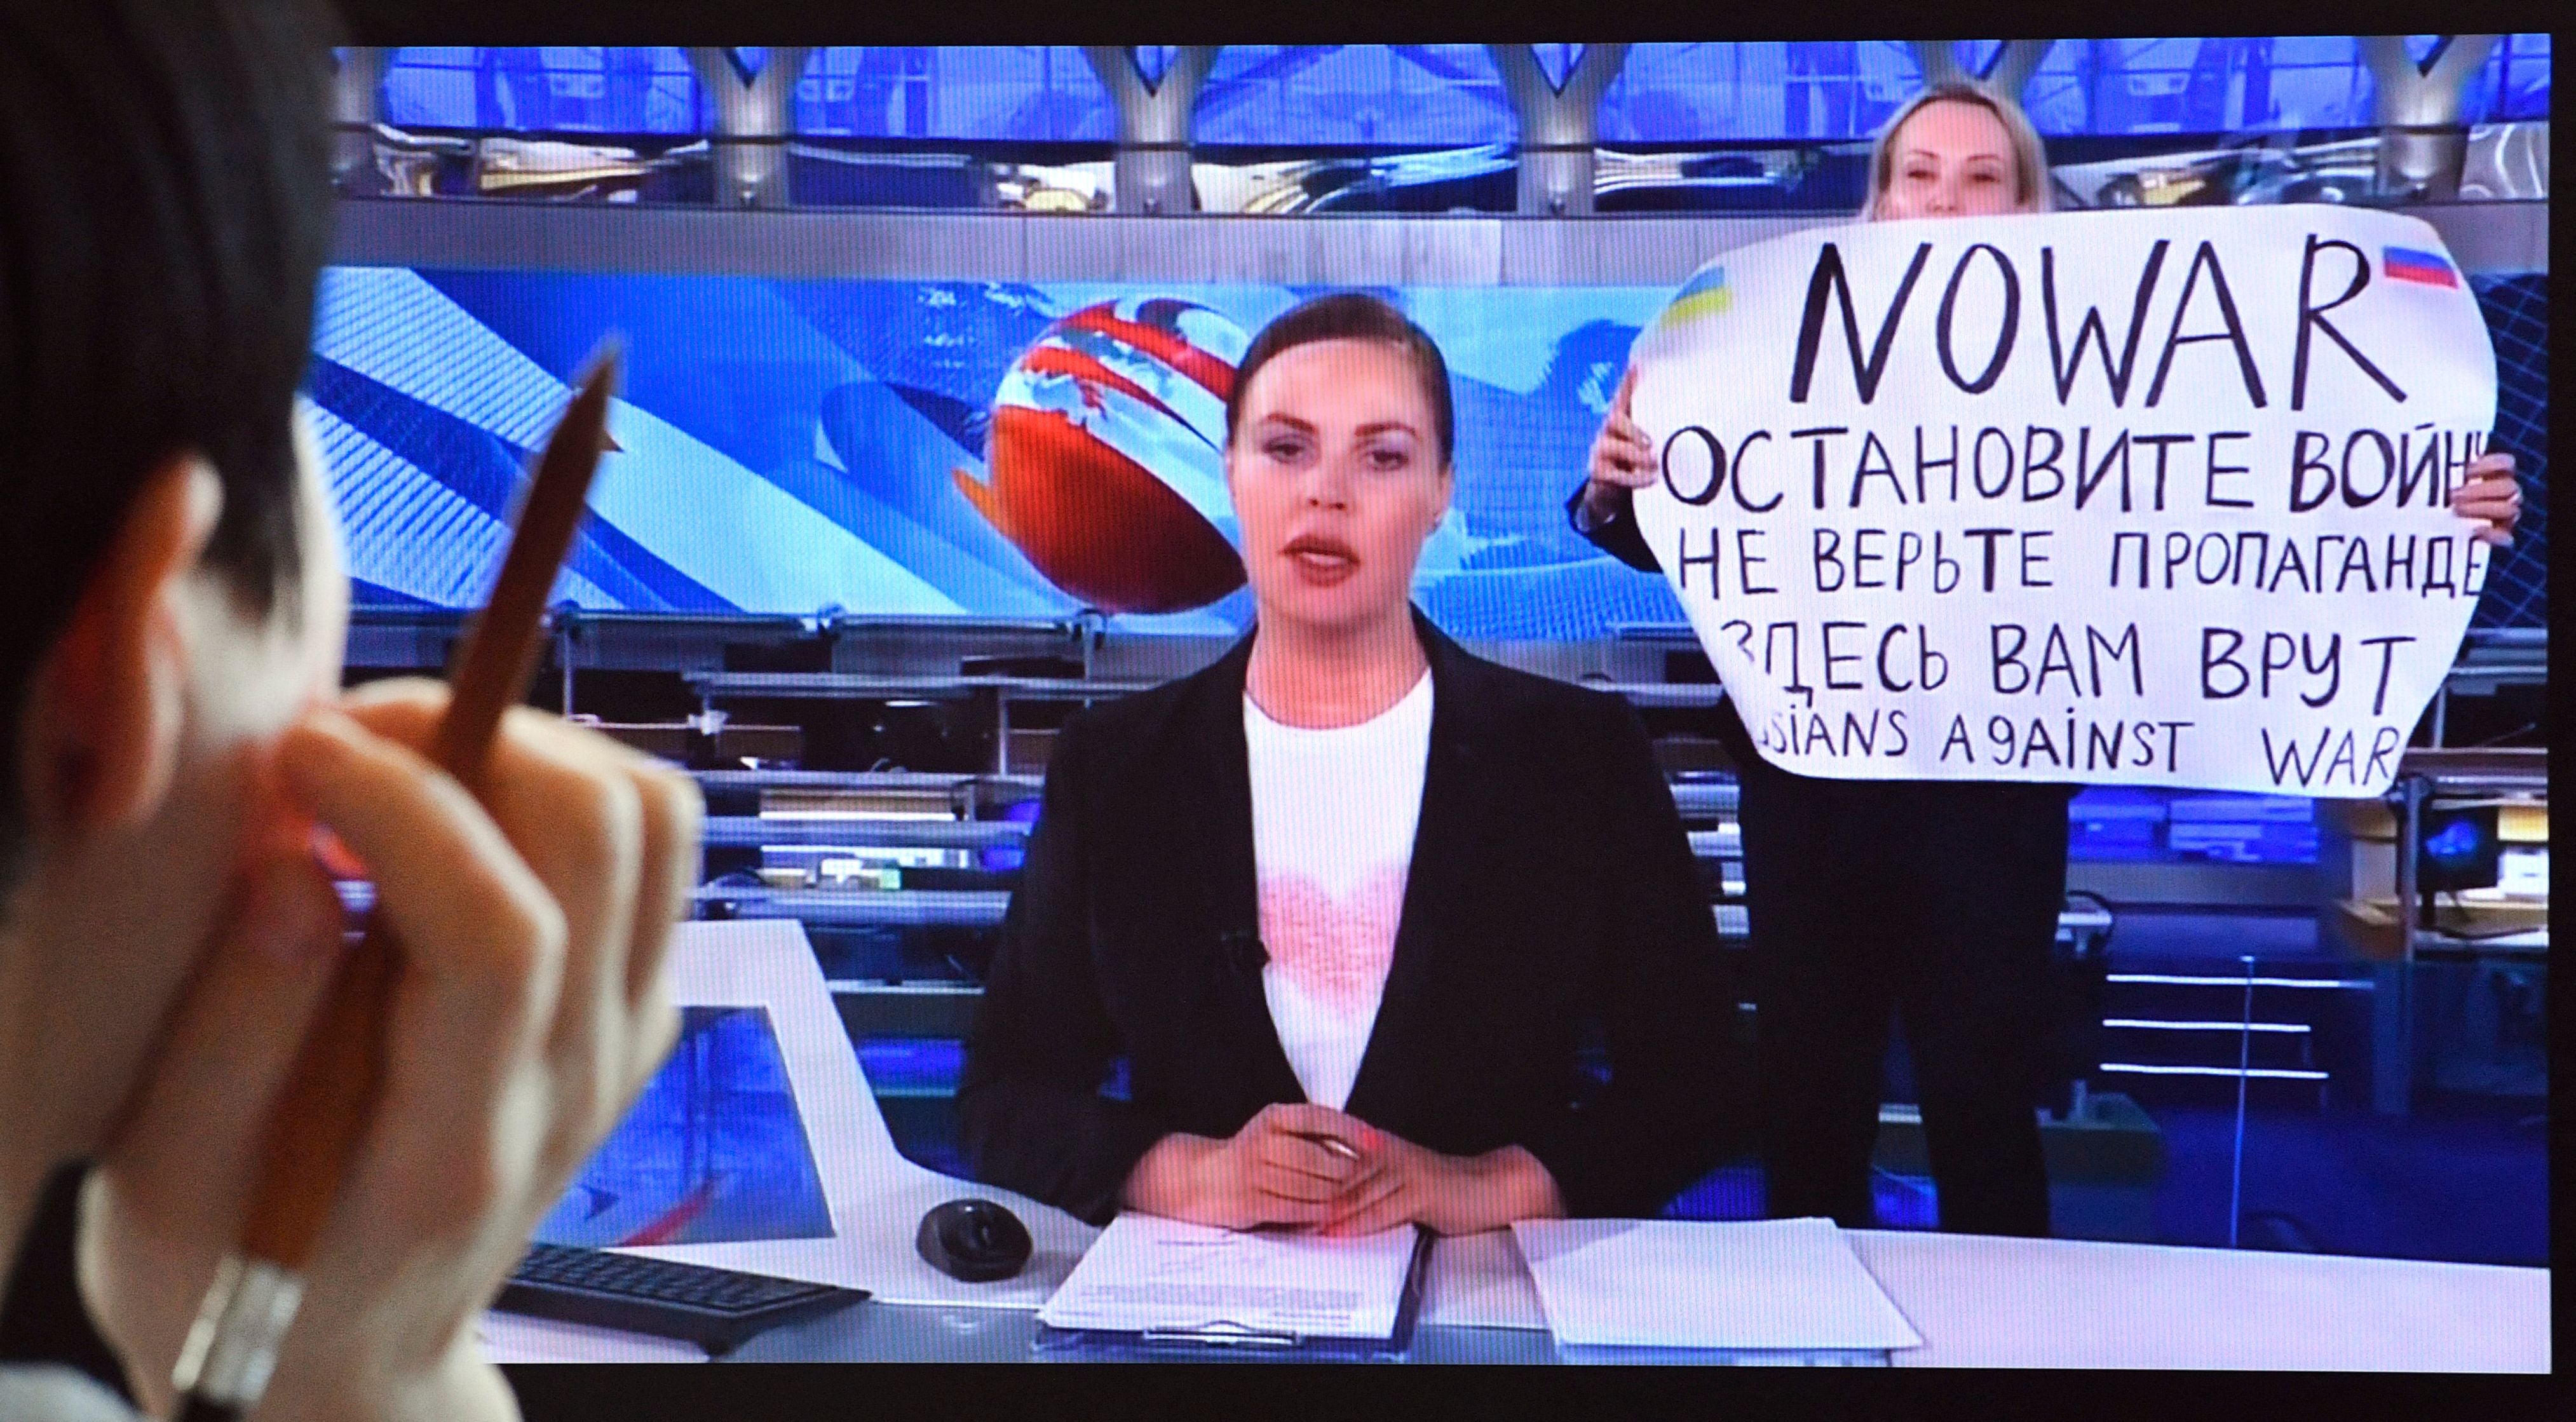 Marina Ovsyannikova’s on-air protest against the Russian war in March